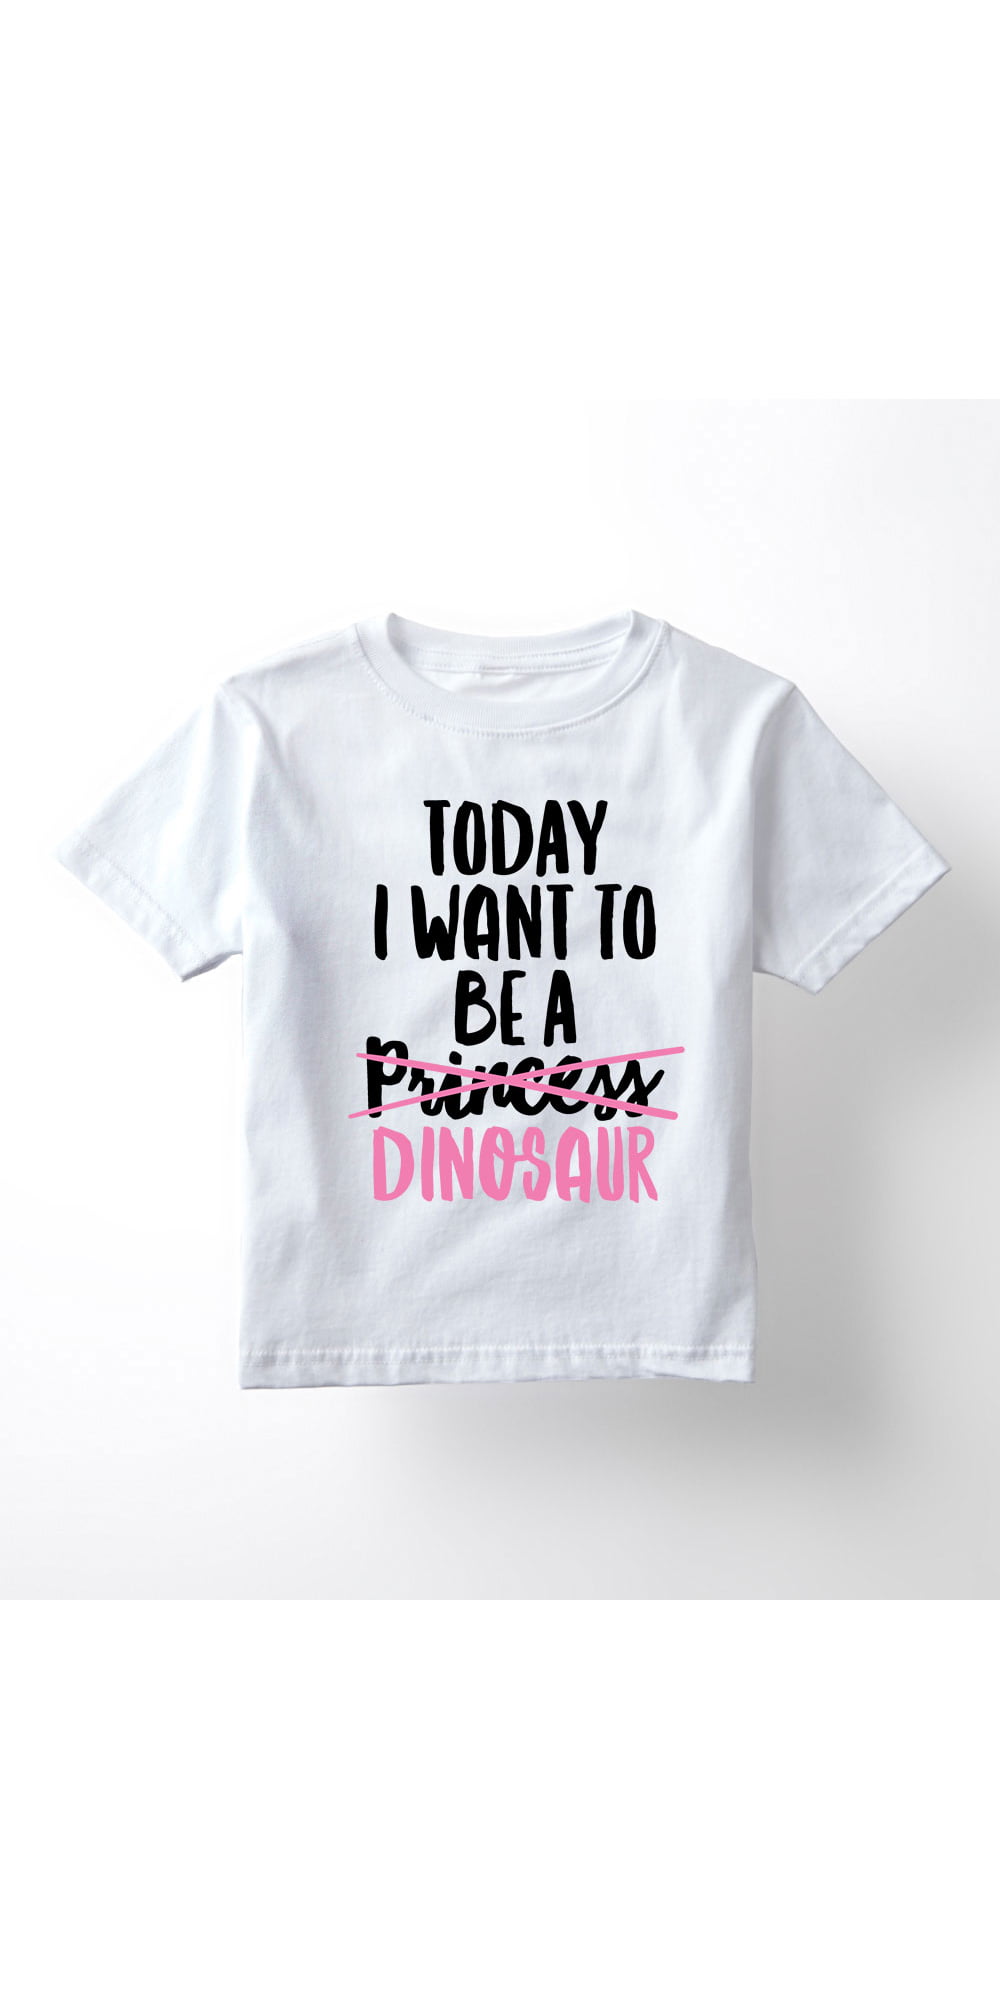 Kids Clothing Girl's T Shirt Alexa Can You Do Everything For Me? Shirts With Sayings Lilac Pink or Ice Blue Funny Girls Tee